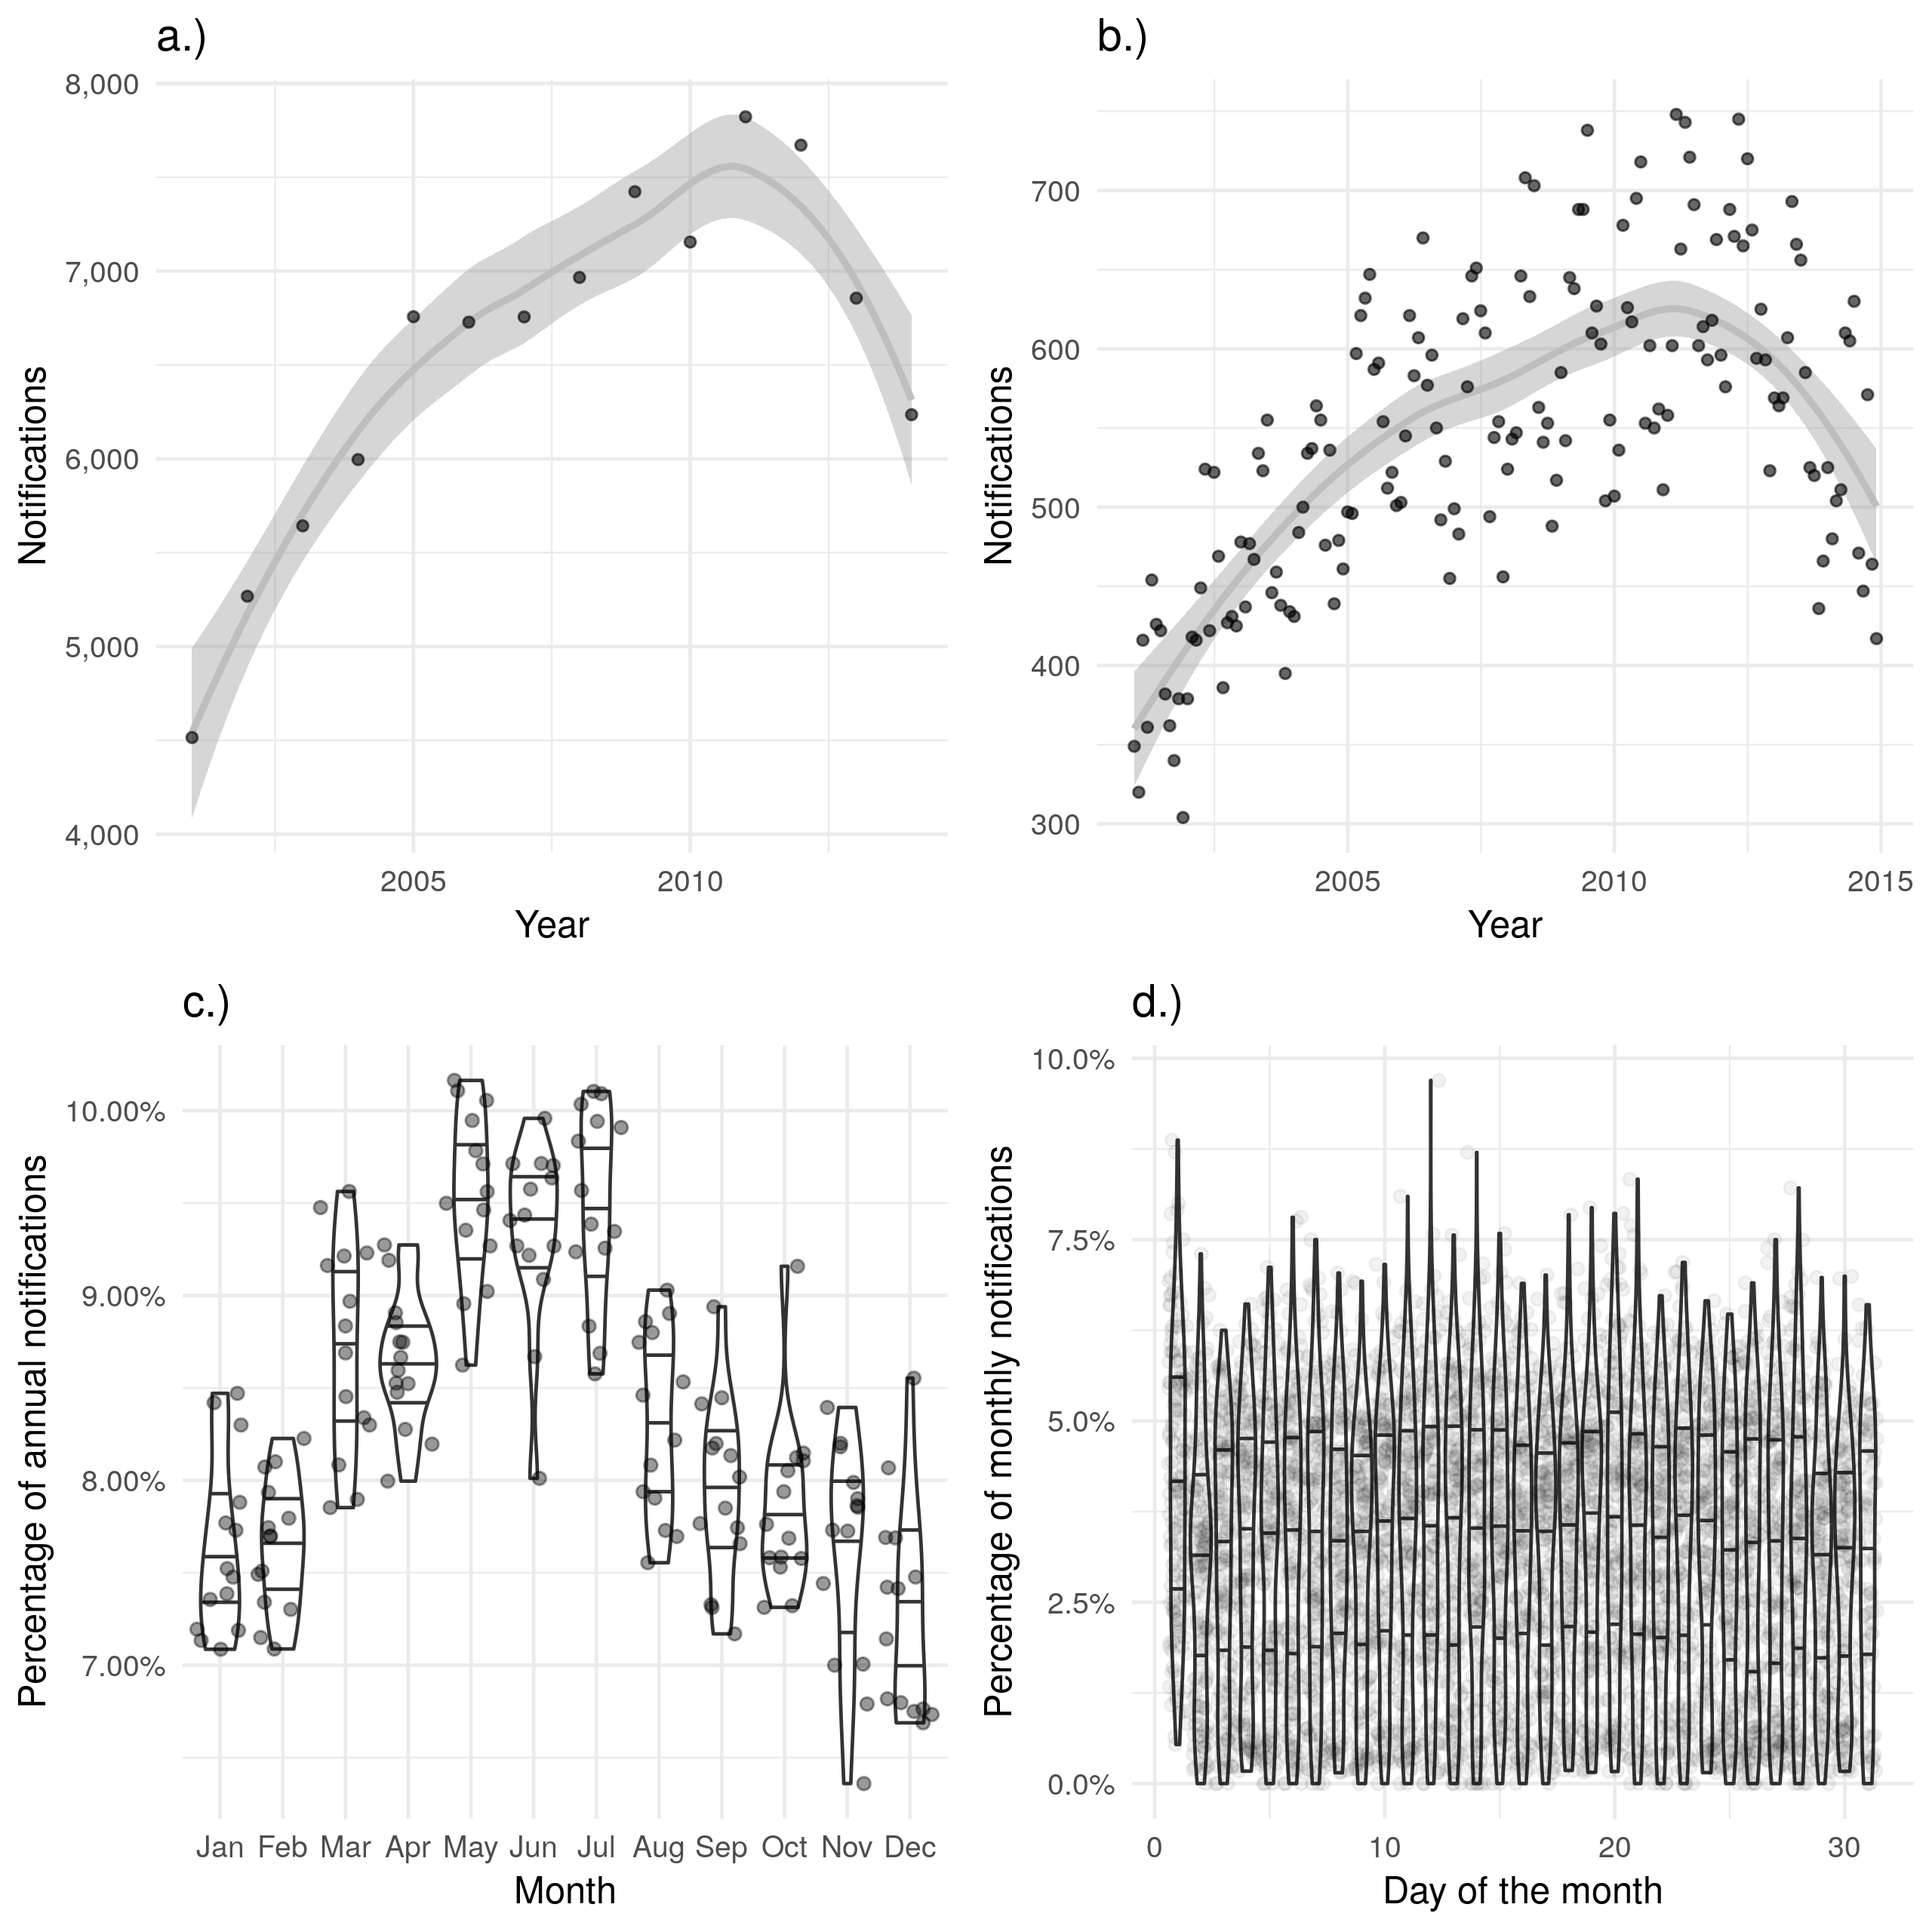 a.) and b.) show notifications over time by date of starting treatment in the ETS, with a.) aggregated by year and  b.) aggregated by month. A trendline has been produced using a locally weighted regression model. Both of these plots show the same overall trend, but b.) contains a large amount of apparent noise. c.) Shows the proportion of cases starting treatment in a given month for each year, with some evidence of a seasonal trend. d.) Shows the proportion of cases starting treatment on a given day for each month, with little evidence of between day variation. Data is only shown from 2001 until 2015 and prior to 2001 this variable was not recorded and it is not complete for 2015.